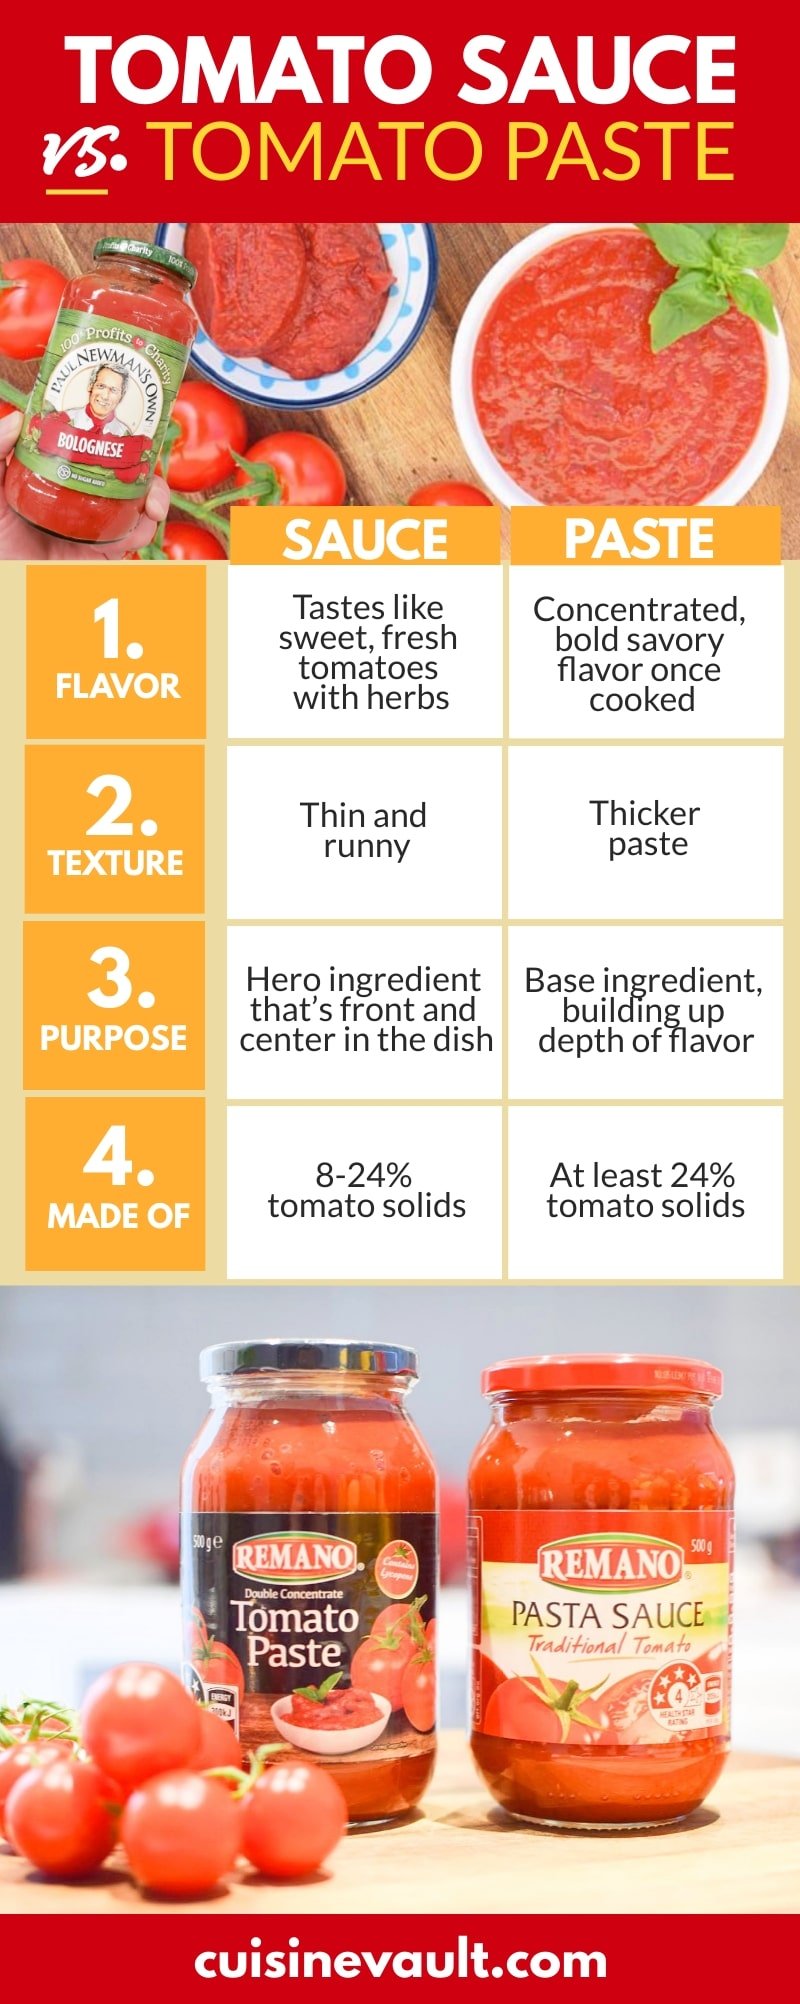 A summary infographic comparing tomato sauce and paste